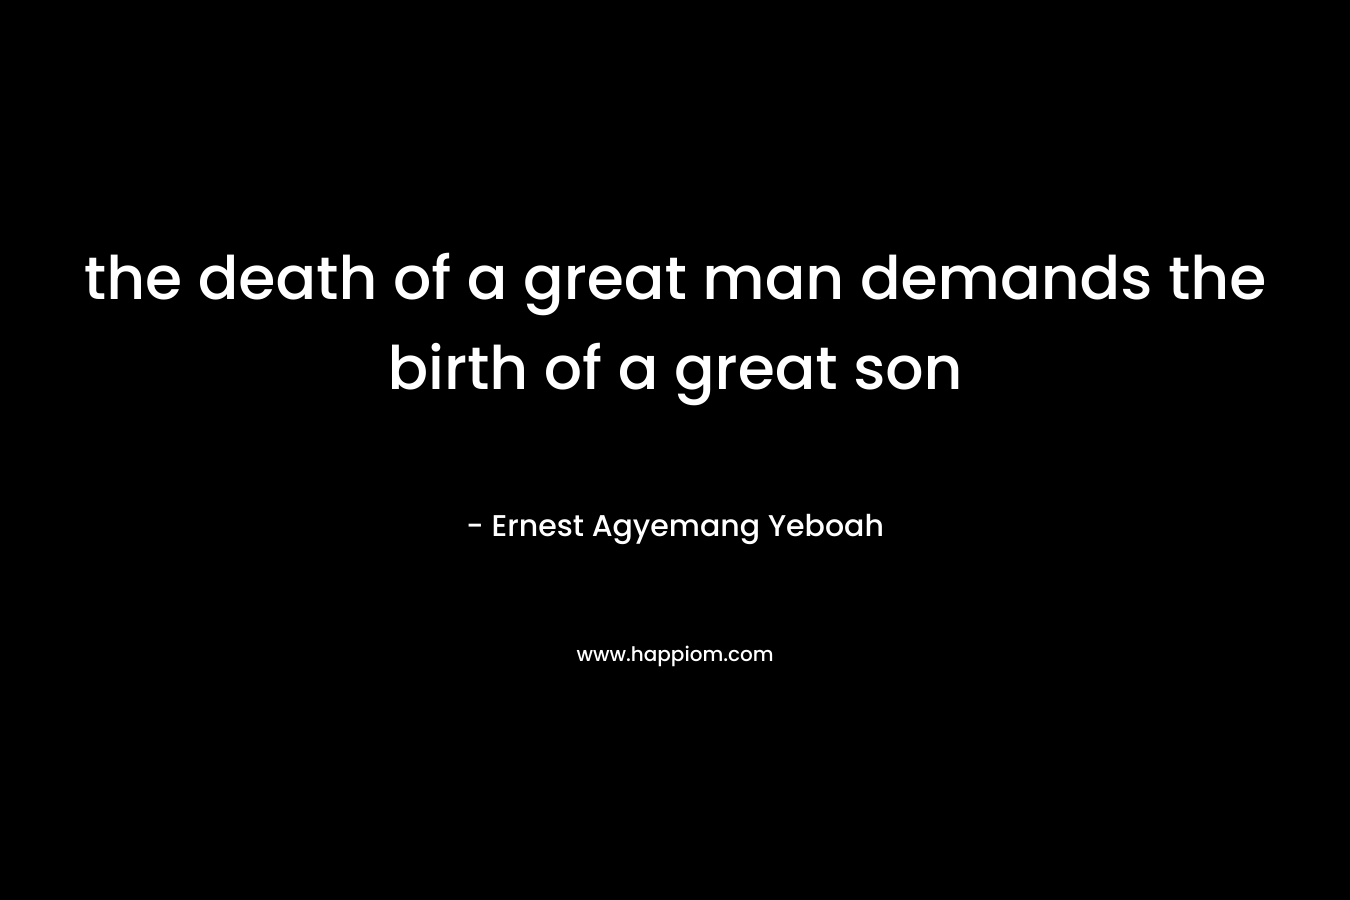 the death of a great man demands the birth of a great son